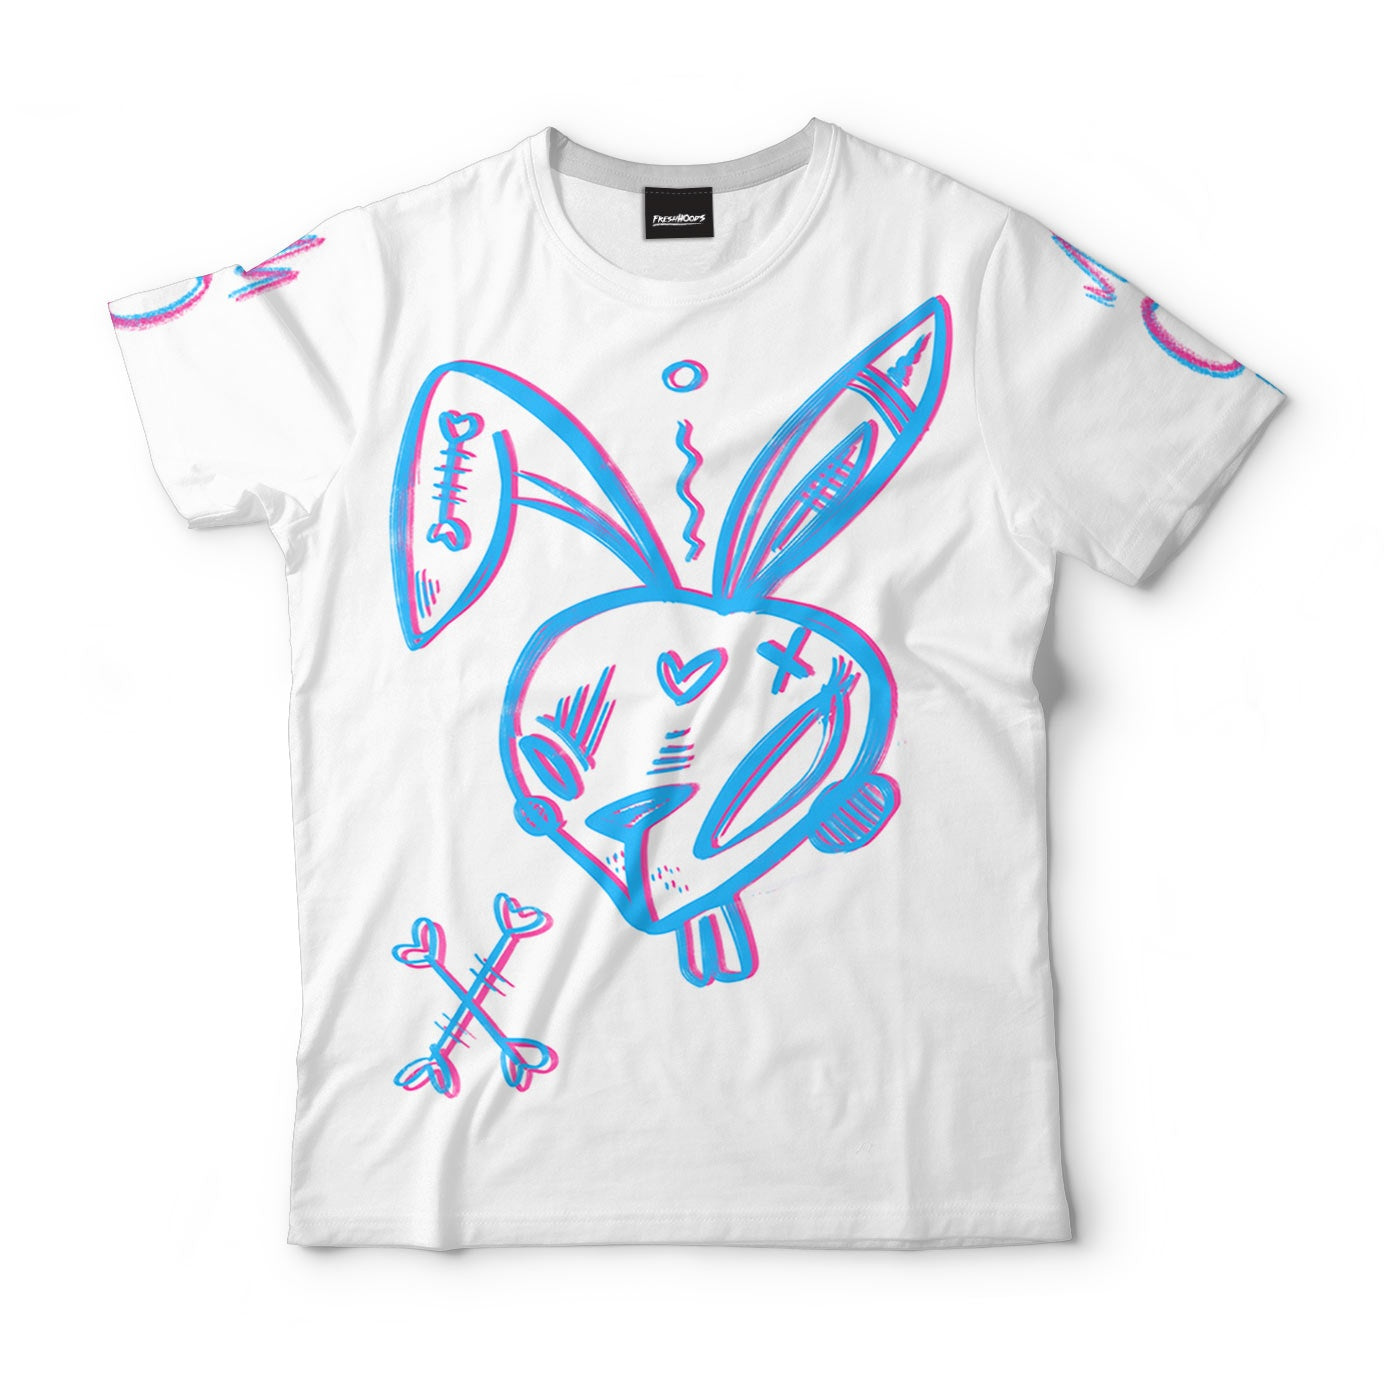 Crazy Bunny T-Shirt: A Fun and Playful Addition to Your Wardrobe